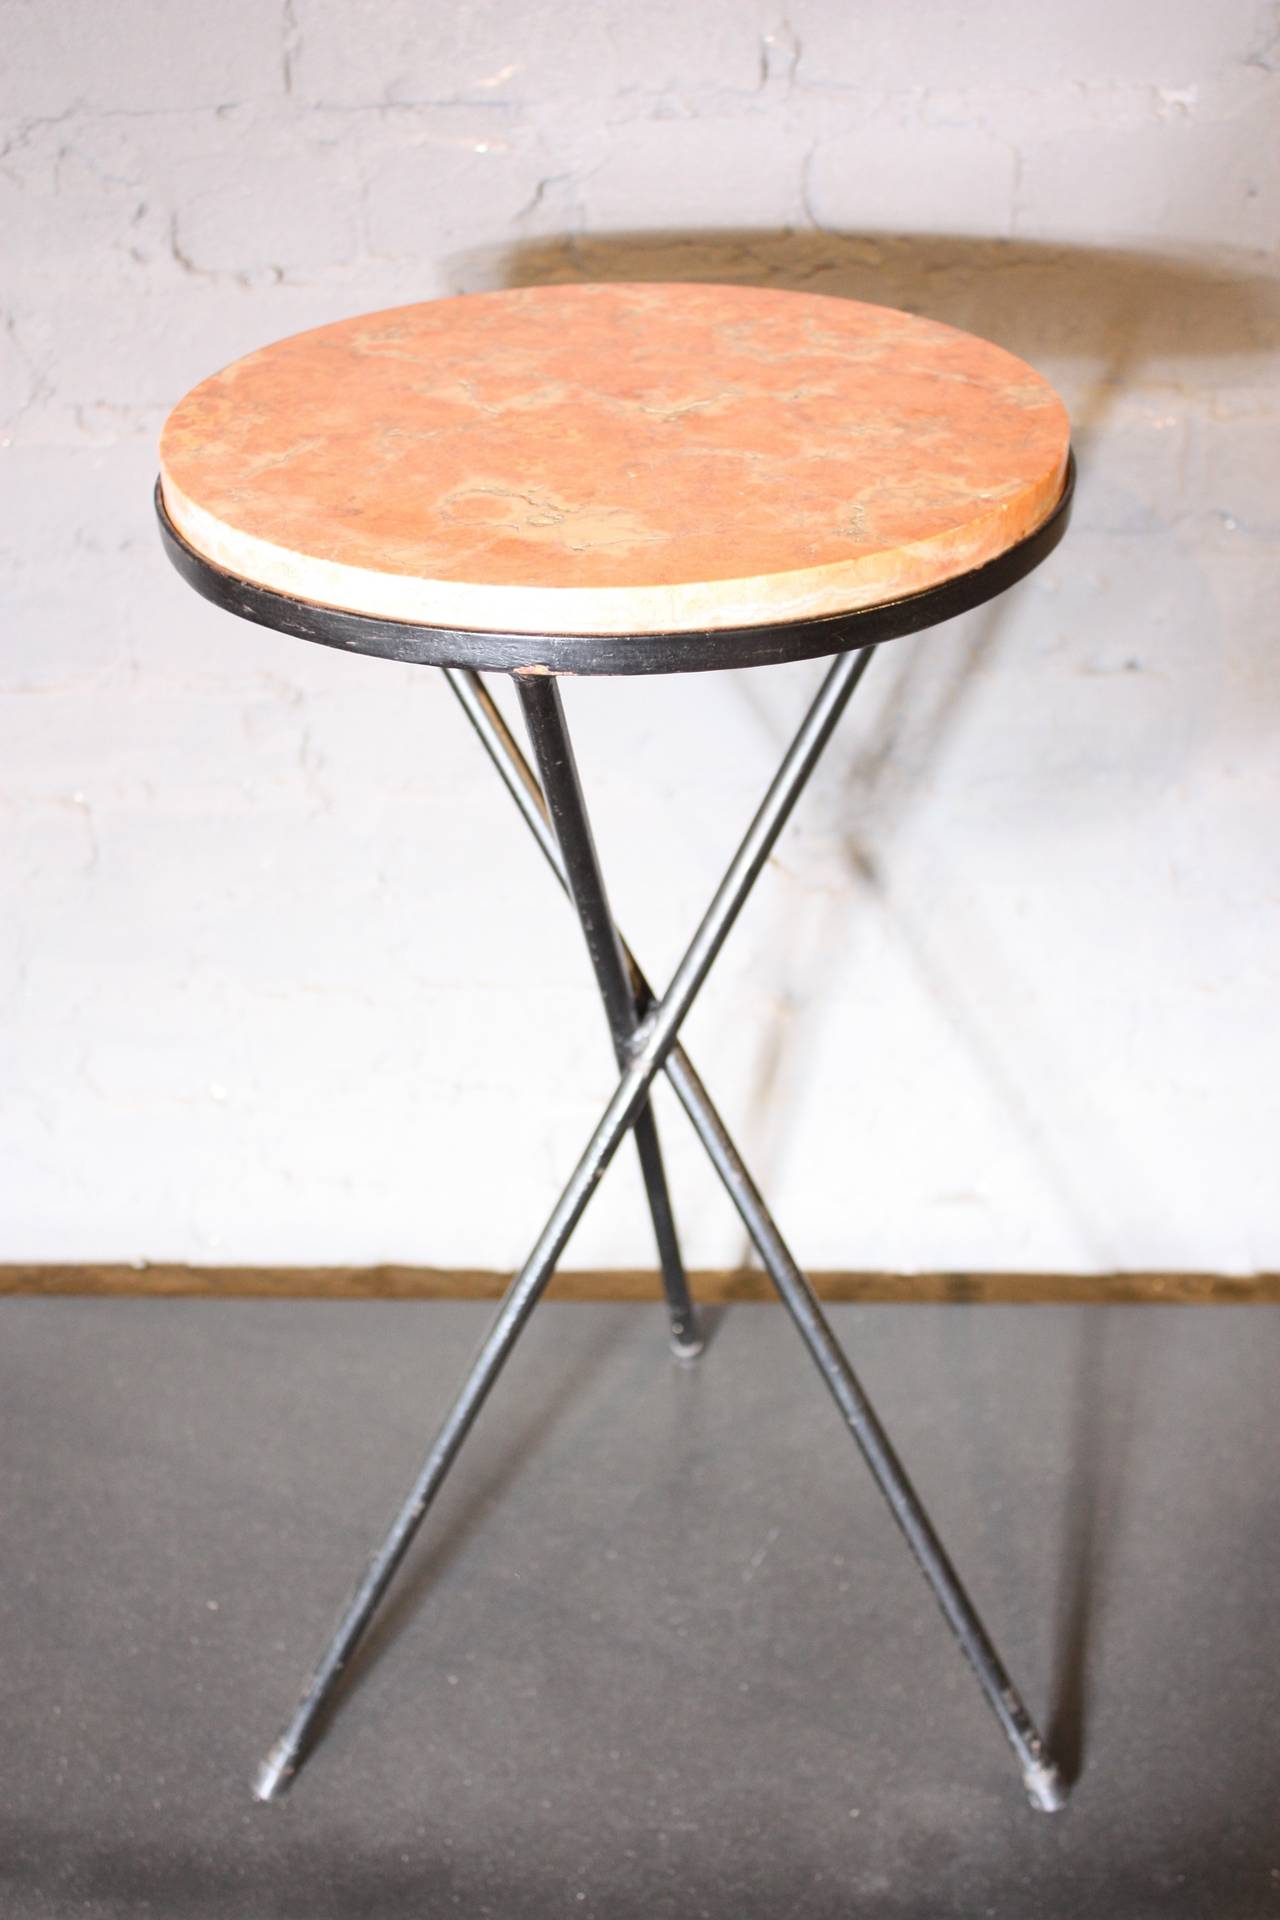 This 1950s French accent table features a wrought-iron tripod base which cradles a pink marble top. This is an elegant occasional table with clean lines.